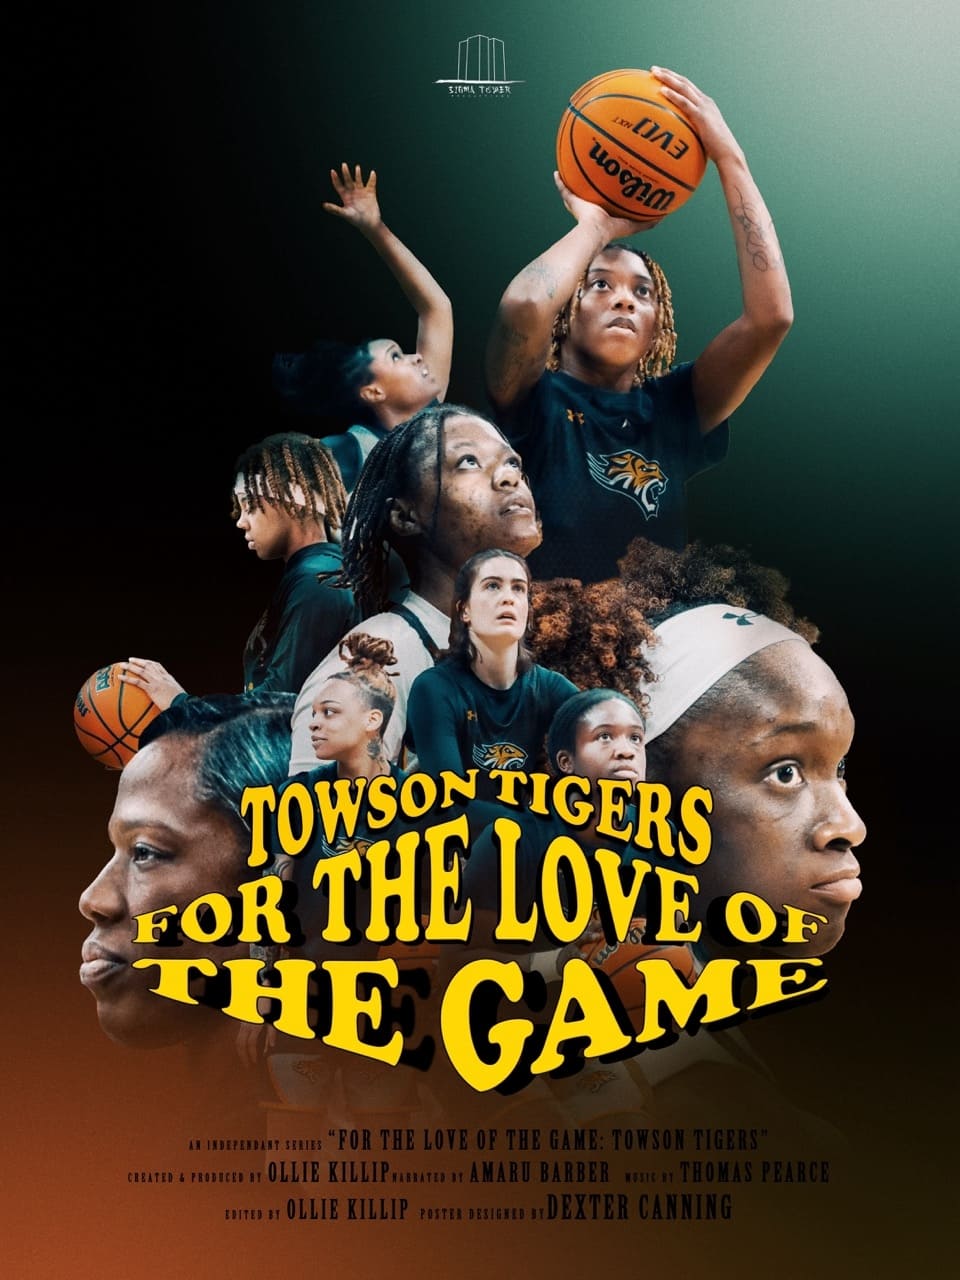 For the Love of the Game: Towson Tigers